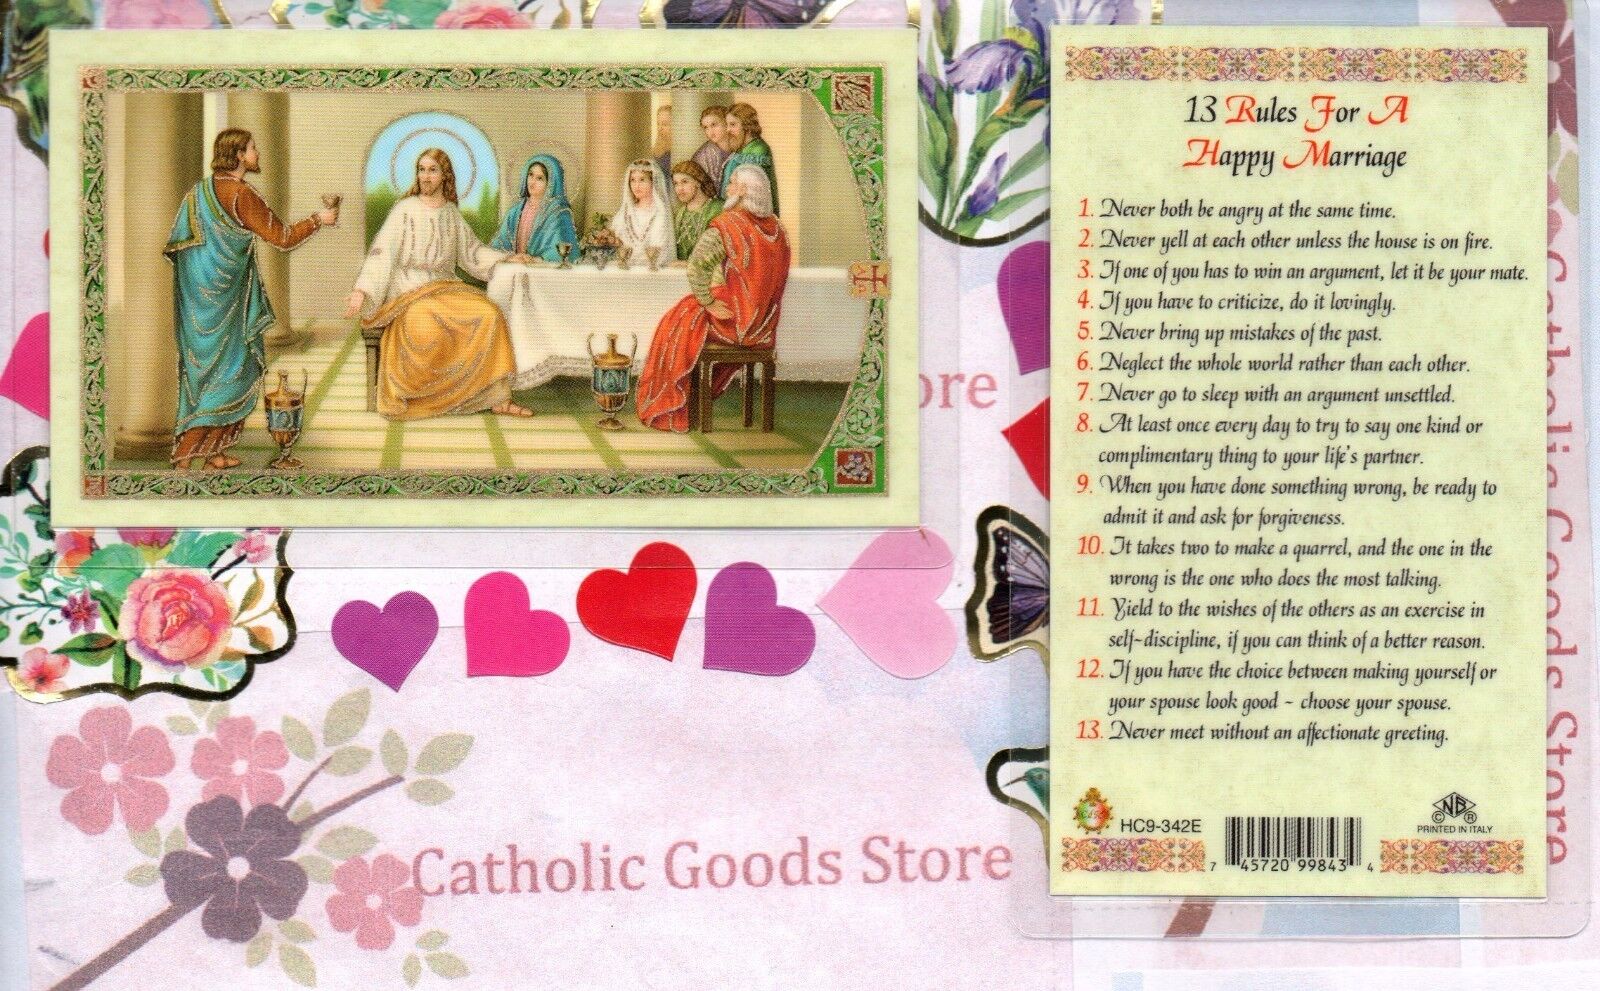 13 Rules for a Happy Marriage - Laminated Holy Card 342E